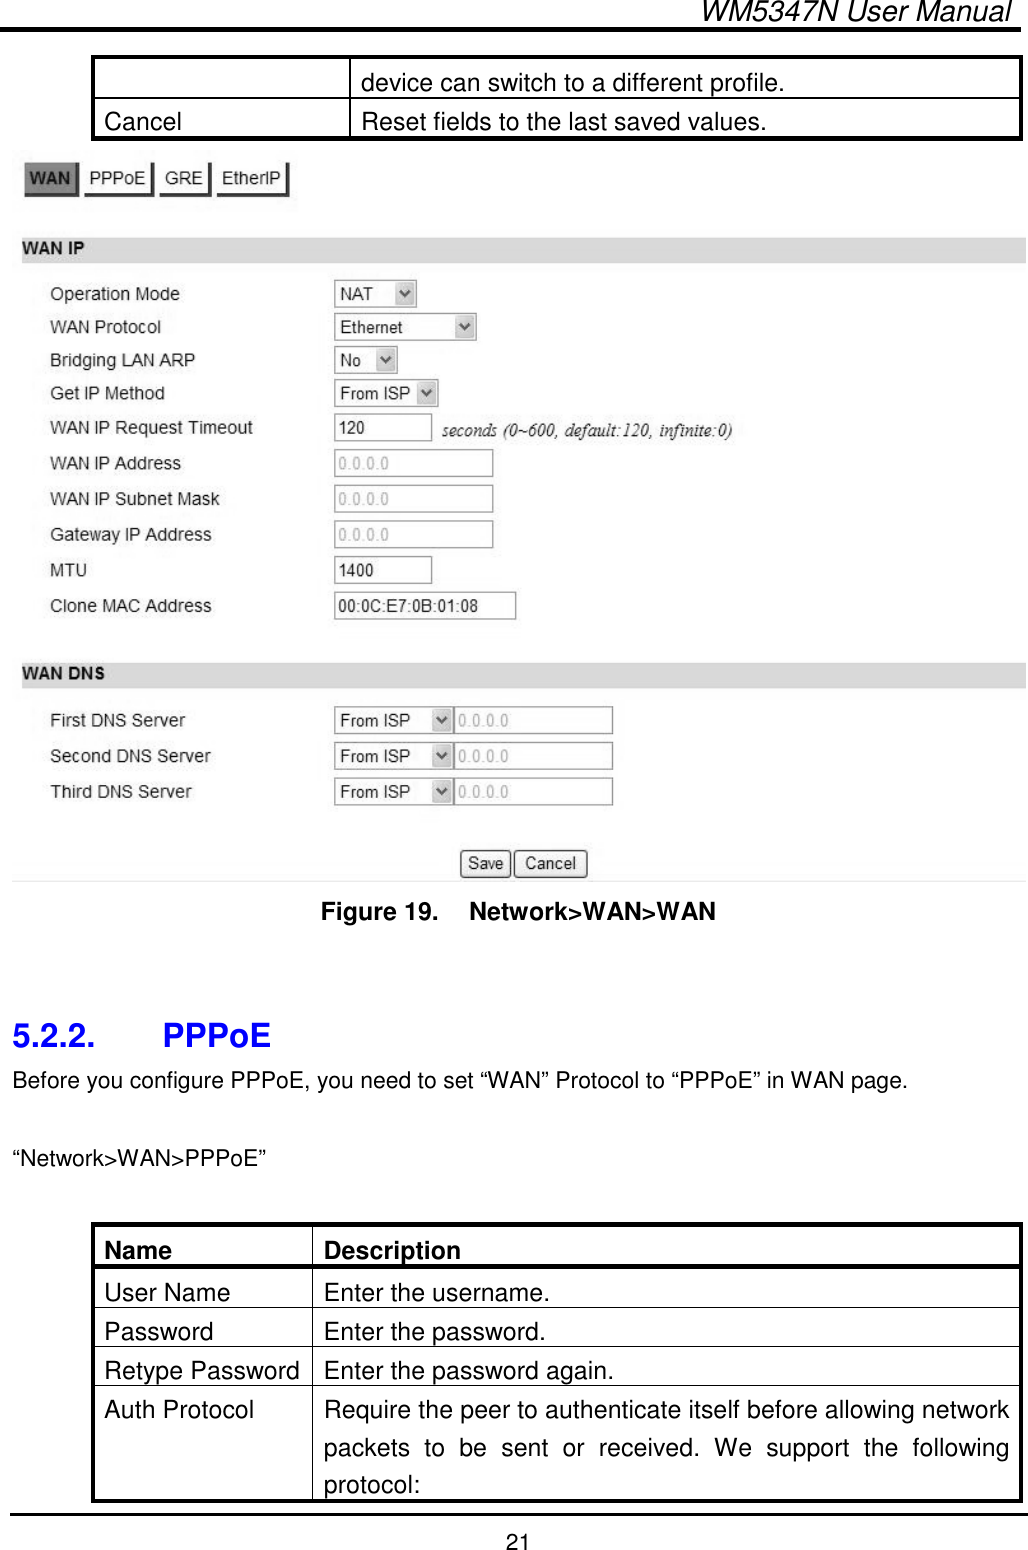  WM5347N User Manual  21 device can switch to a different profile. Cancel  Reset fields to the last saved values.  Figure 19.   Network&gt;WAN&gt;WAN   5.2.2.  PPPoE Before you configure PPPoE, you need to set “WAN” Protocol to “PPPoE” in WAN page.    “Network&gt;WAN&gt;PPPoE”  Name  Description User Name  Enter the username. Password  Enter the password. Retype Password Enter the password again. Auth Protocol  Require the peer to authenticate itself before allowing network packets  to  be  sent  or  received.  We  support  the  following protocol: 